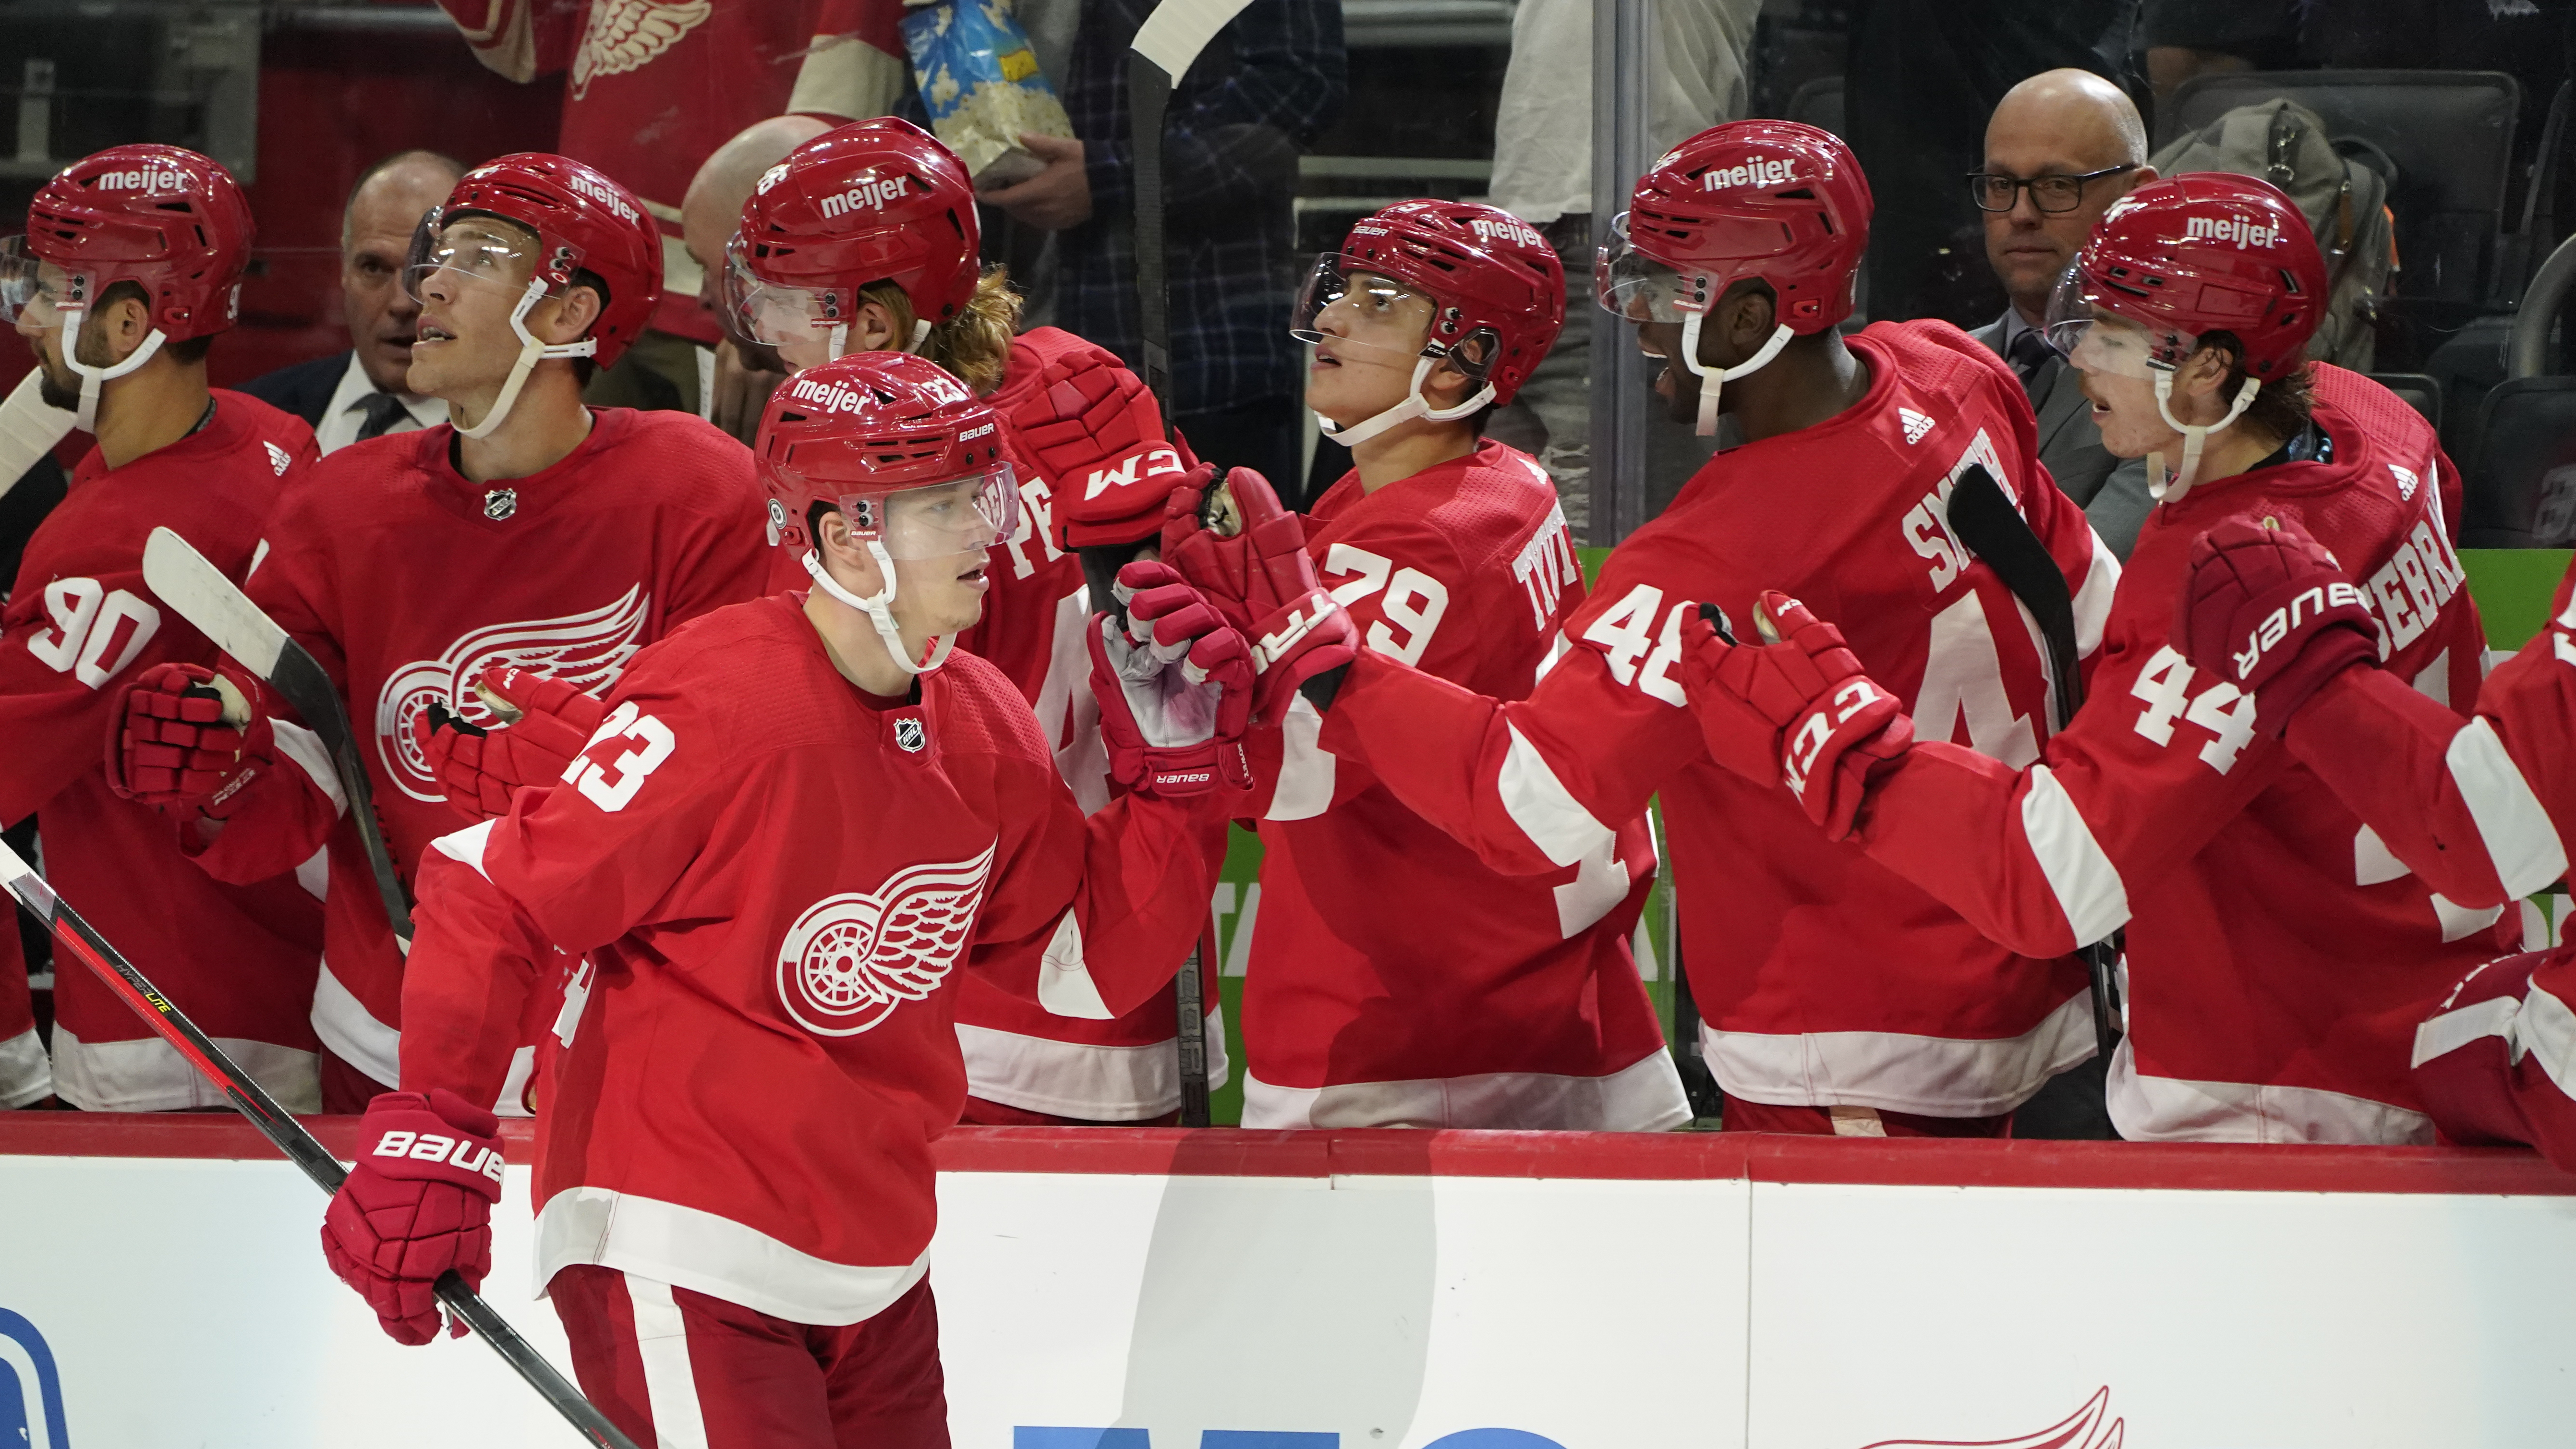 Raymond scores first NHL goal as Red Wings drop Columbus